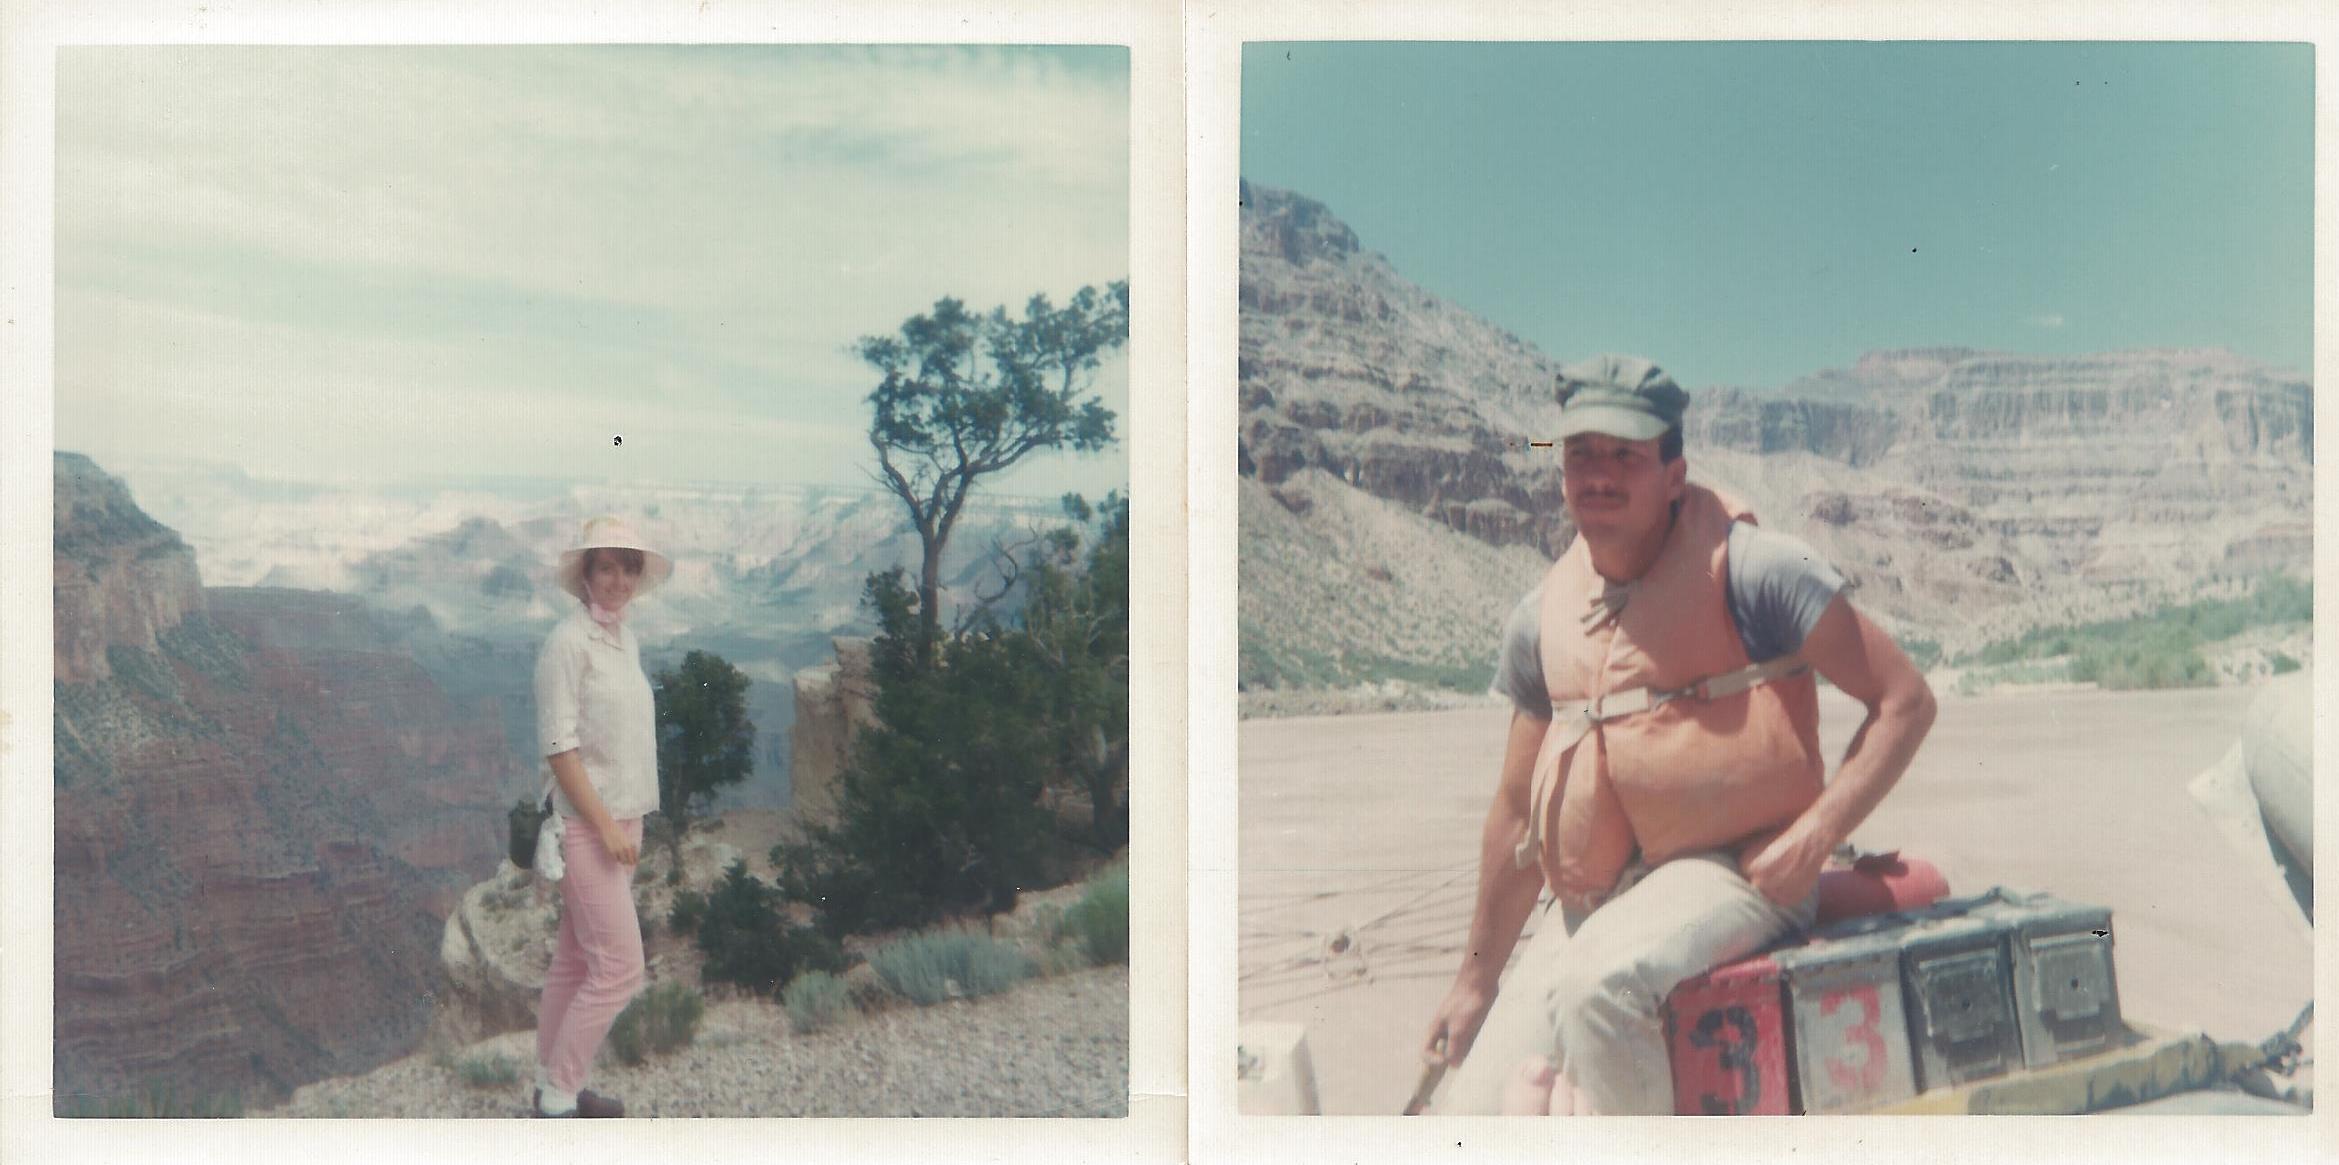 Vicki Woodruff hiking down the Kaibab Trail to join the river trip Aug. 10, 1968. Dave Mackay running the boat in the Grand Canyon Aug. 13, 1968.